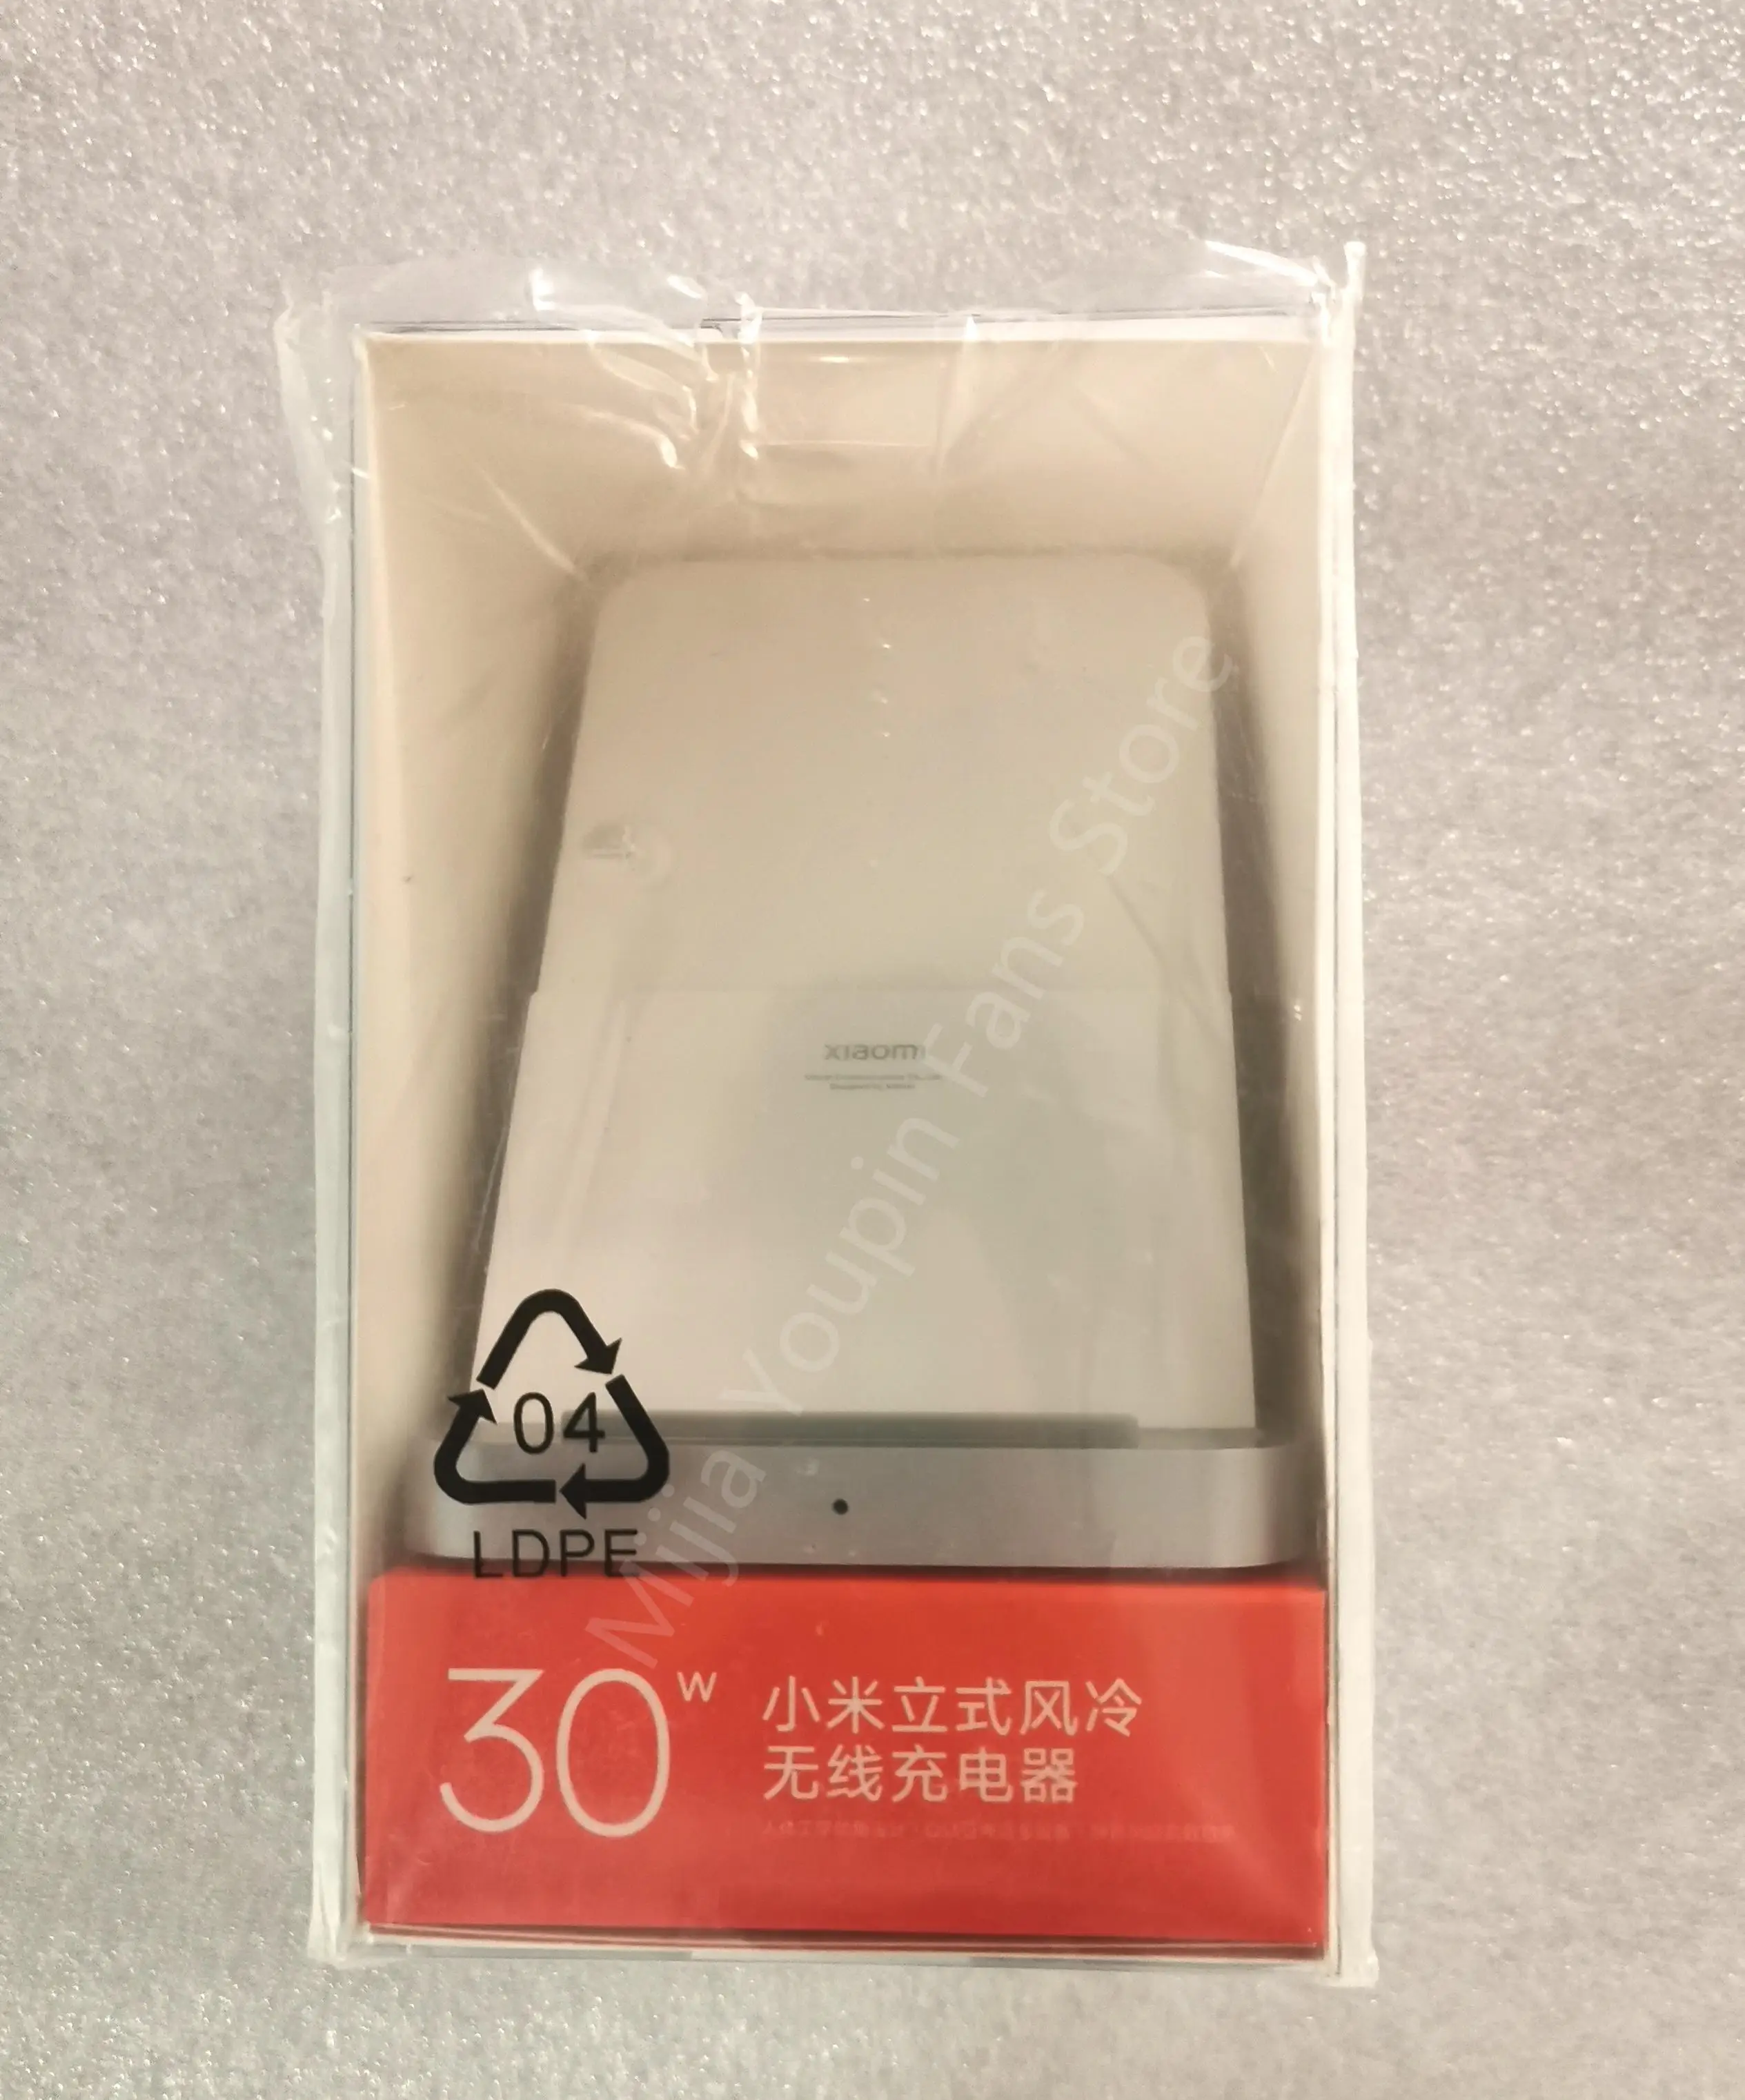 

2020 New 100% Original Xiaomi Vertical Air-cooled Wireless Charger 30W Max with Flash Charging for Xiaomi Mi Smartphone